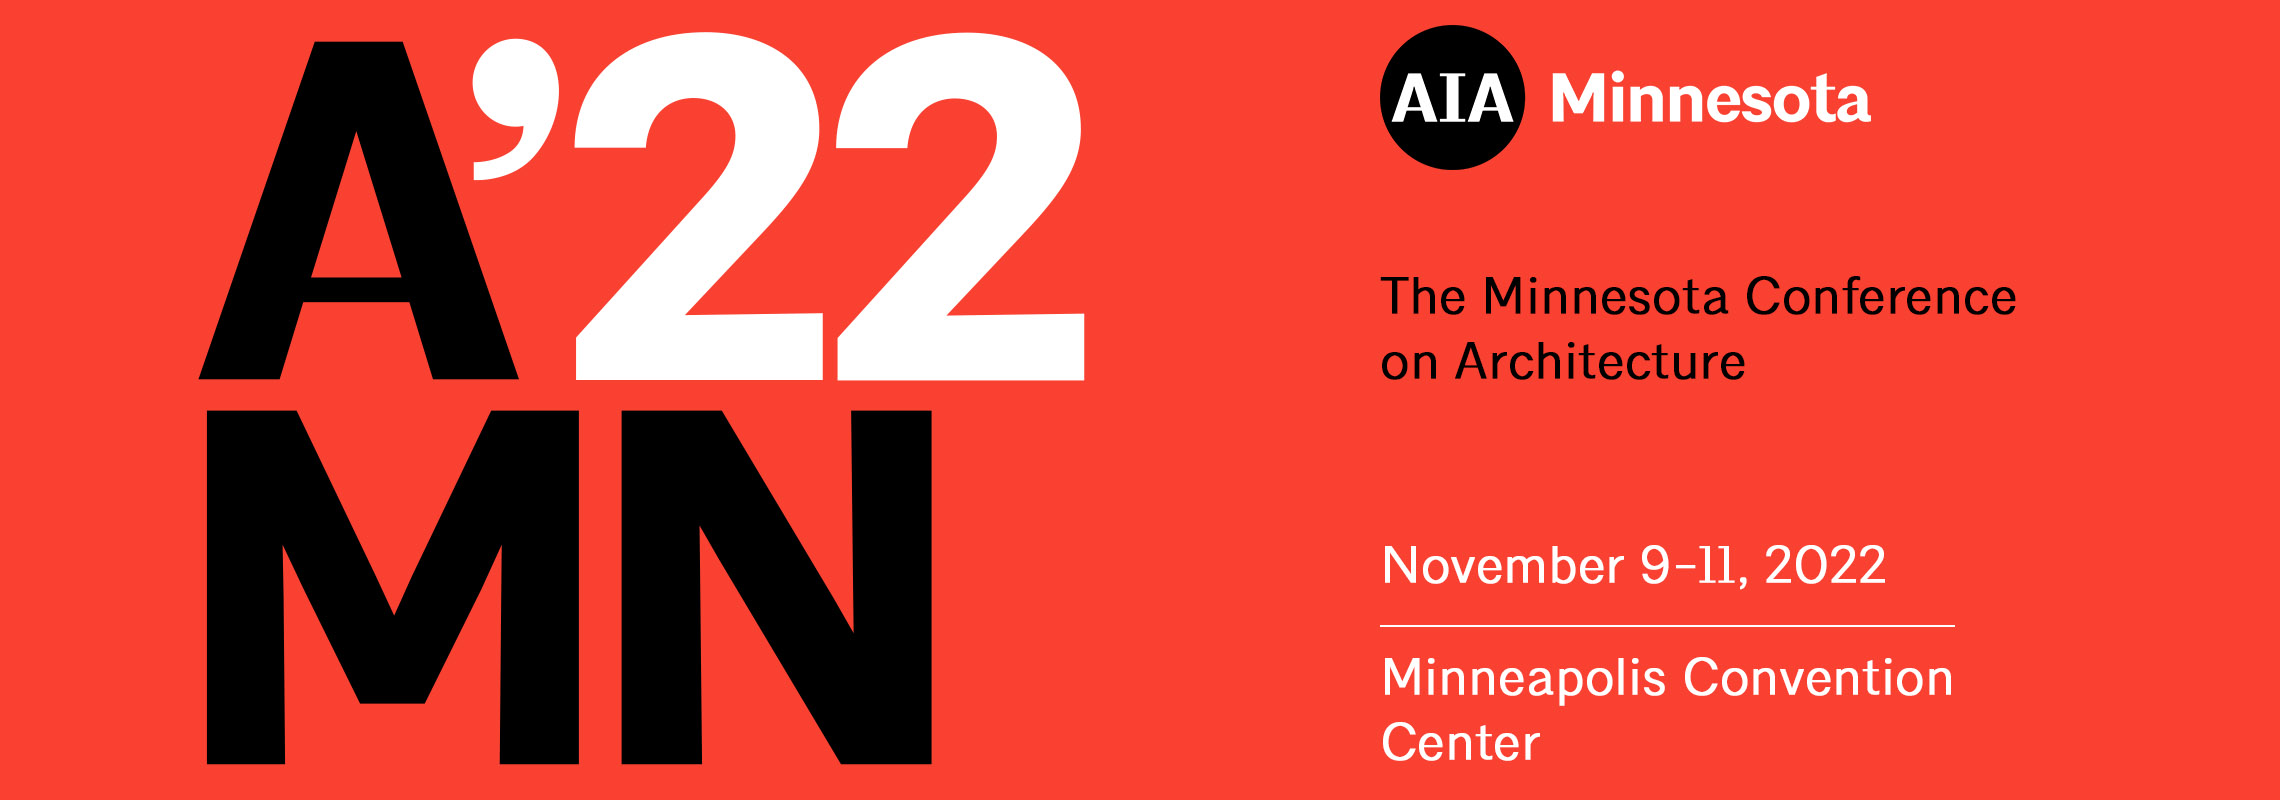 Minnesota Conference on Architecture